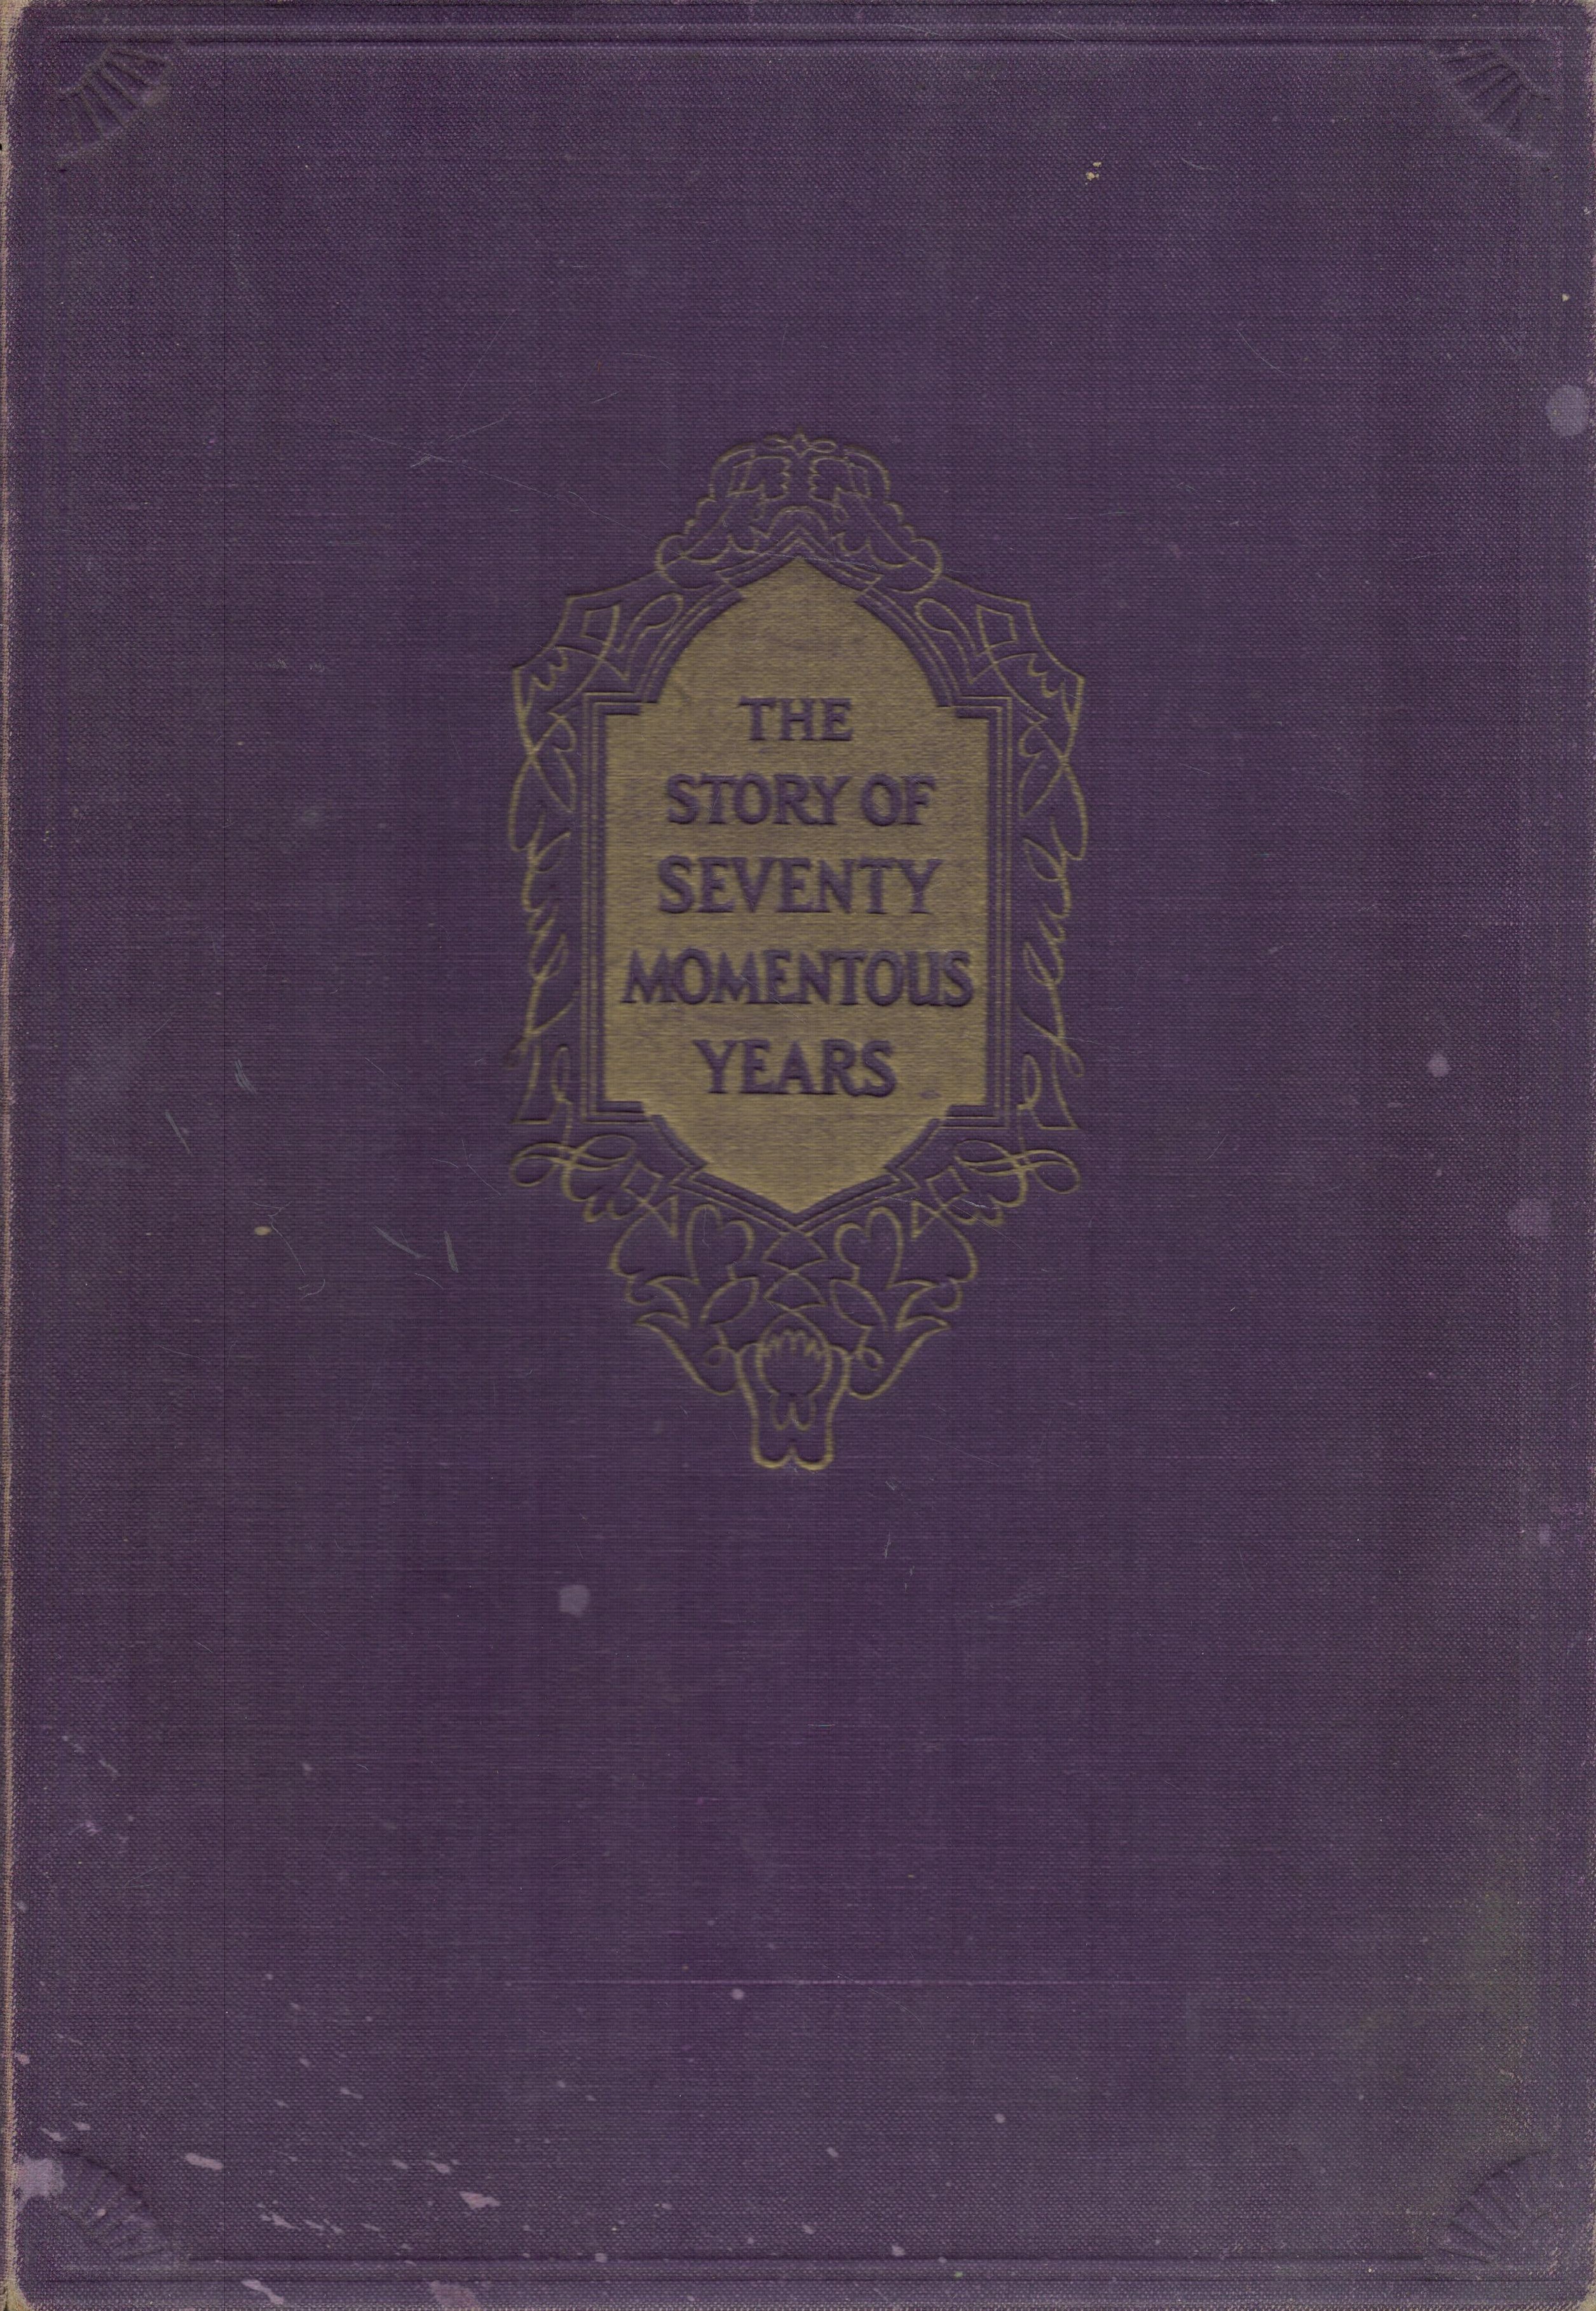 1930's Royal Biography. The Story of Seventy Momentous Years. The Life and Times of King George V